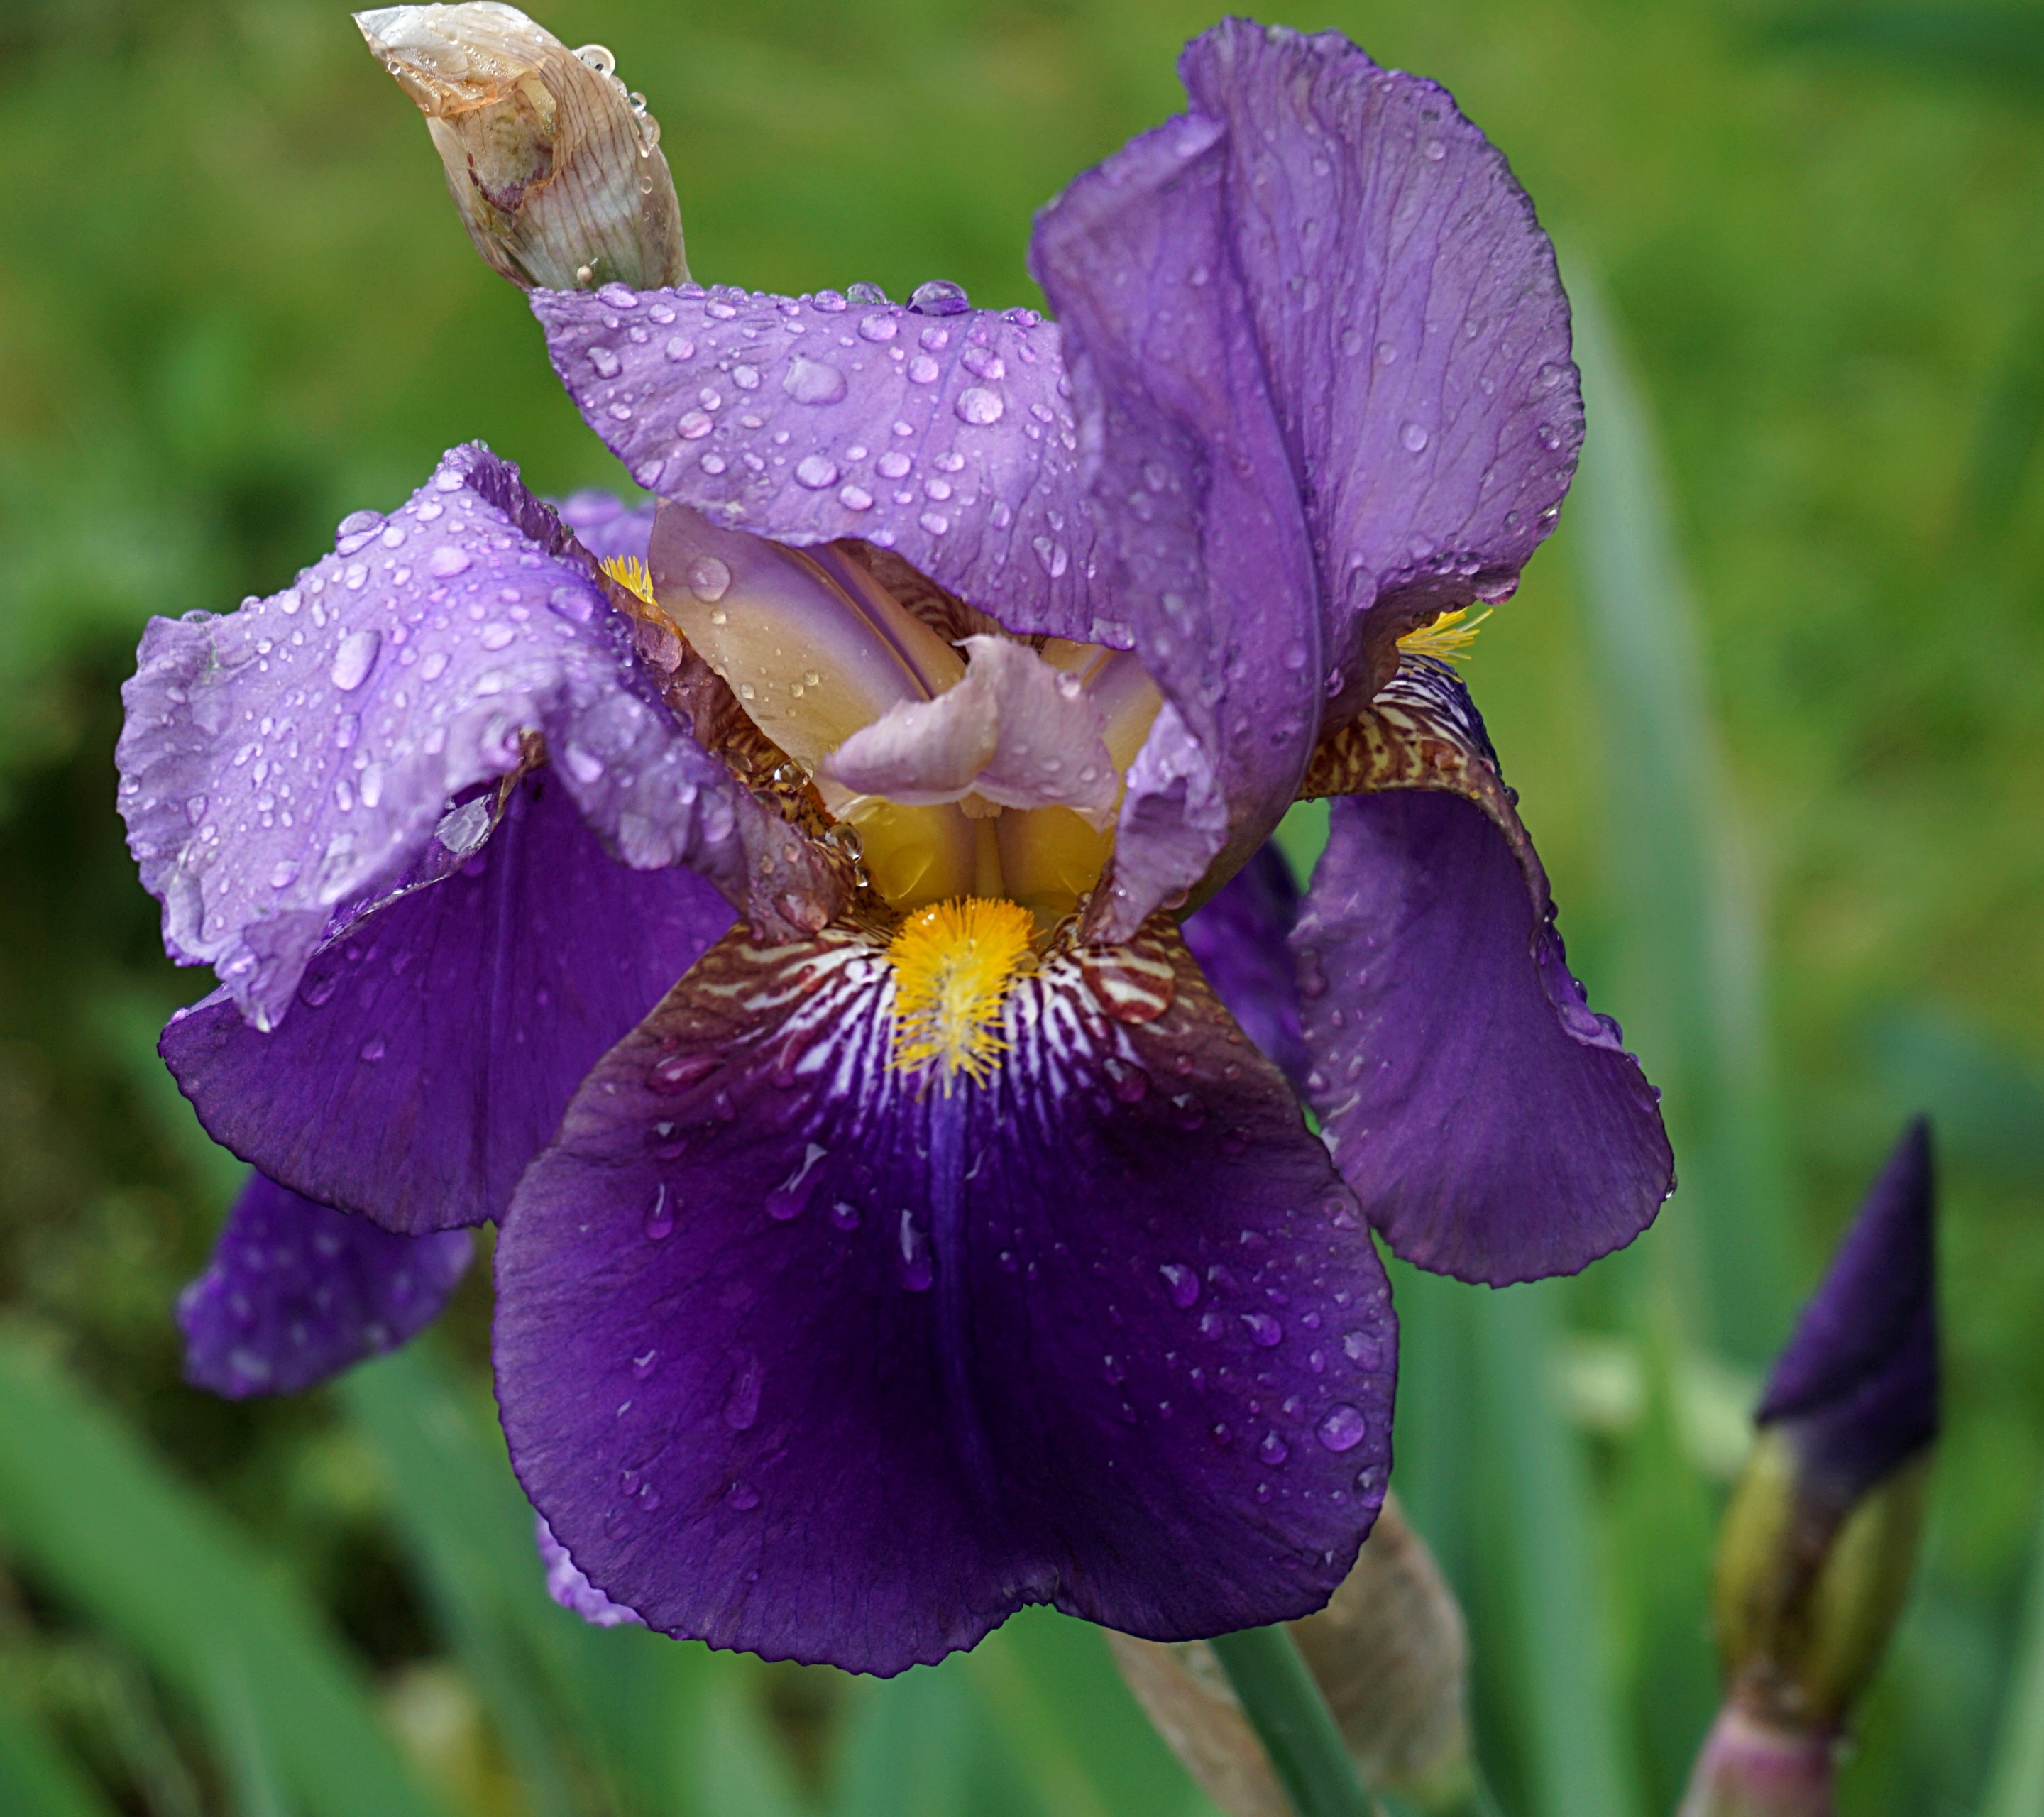  Iris HD Android Wallpapers